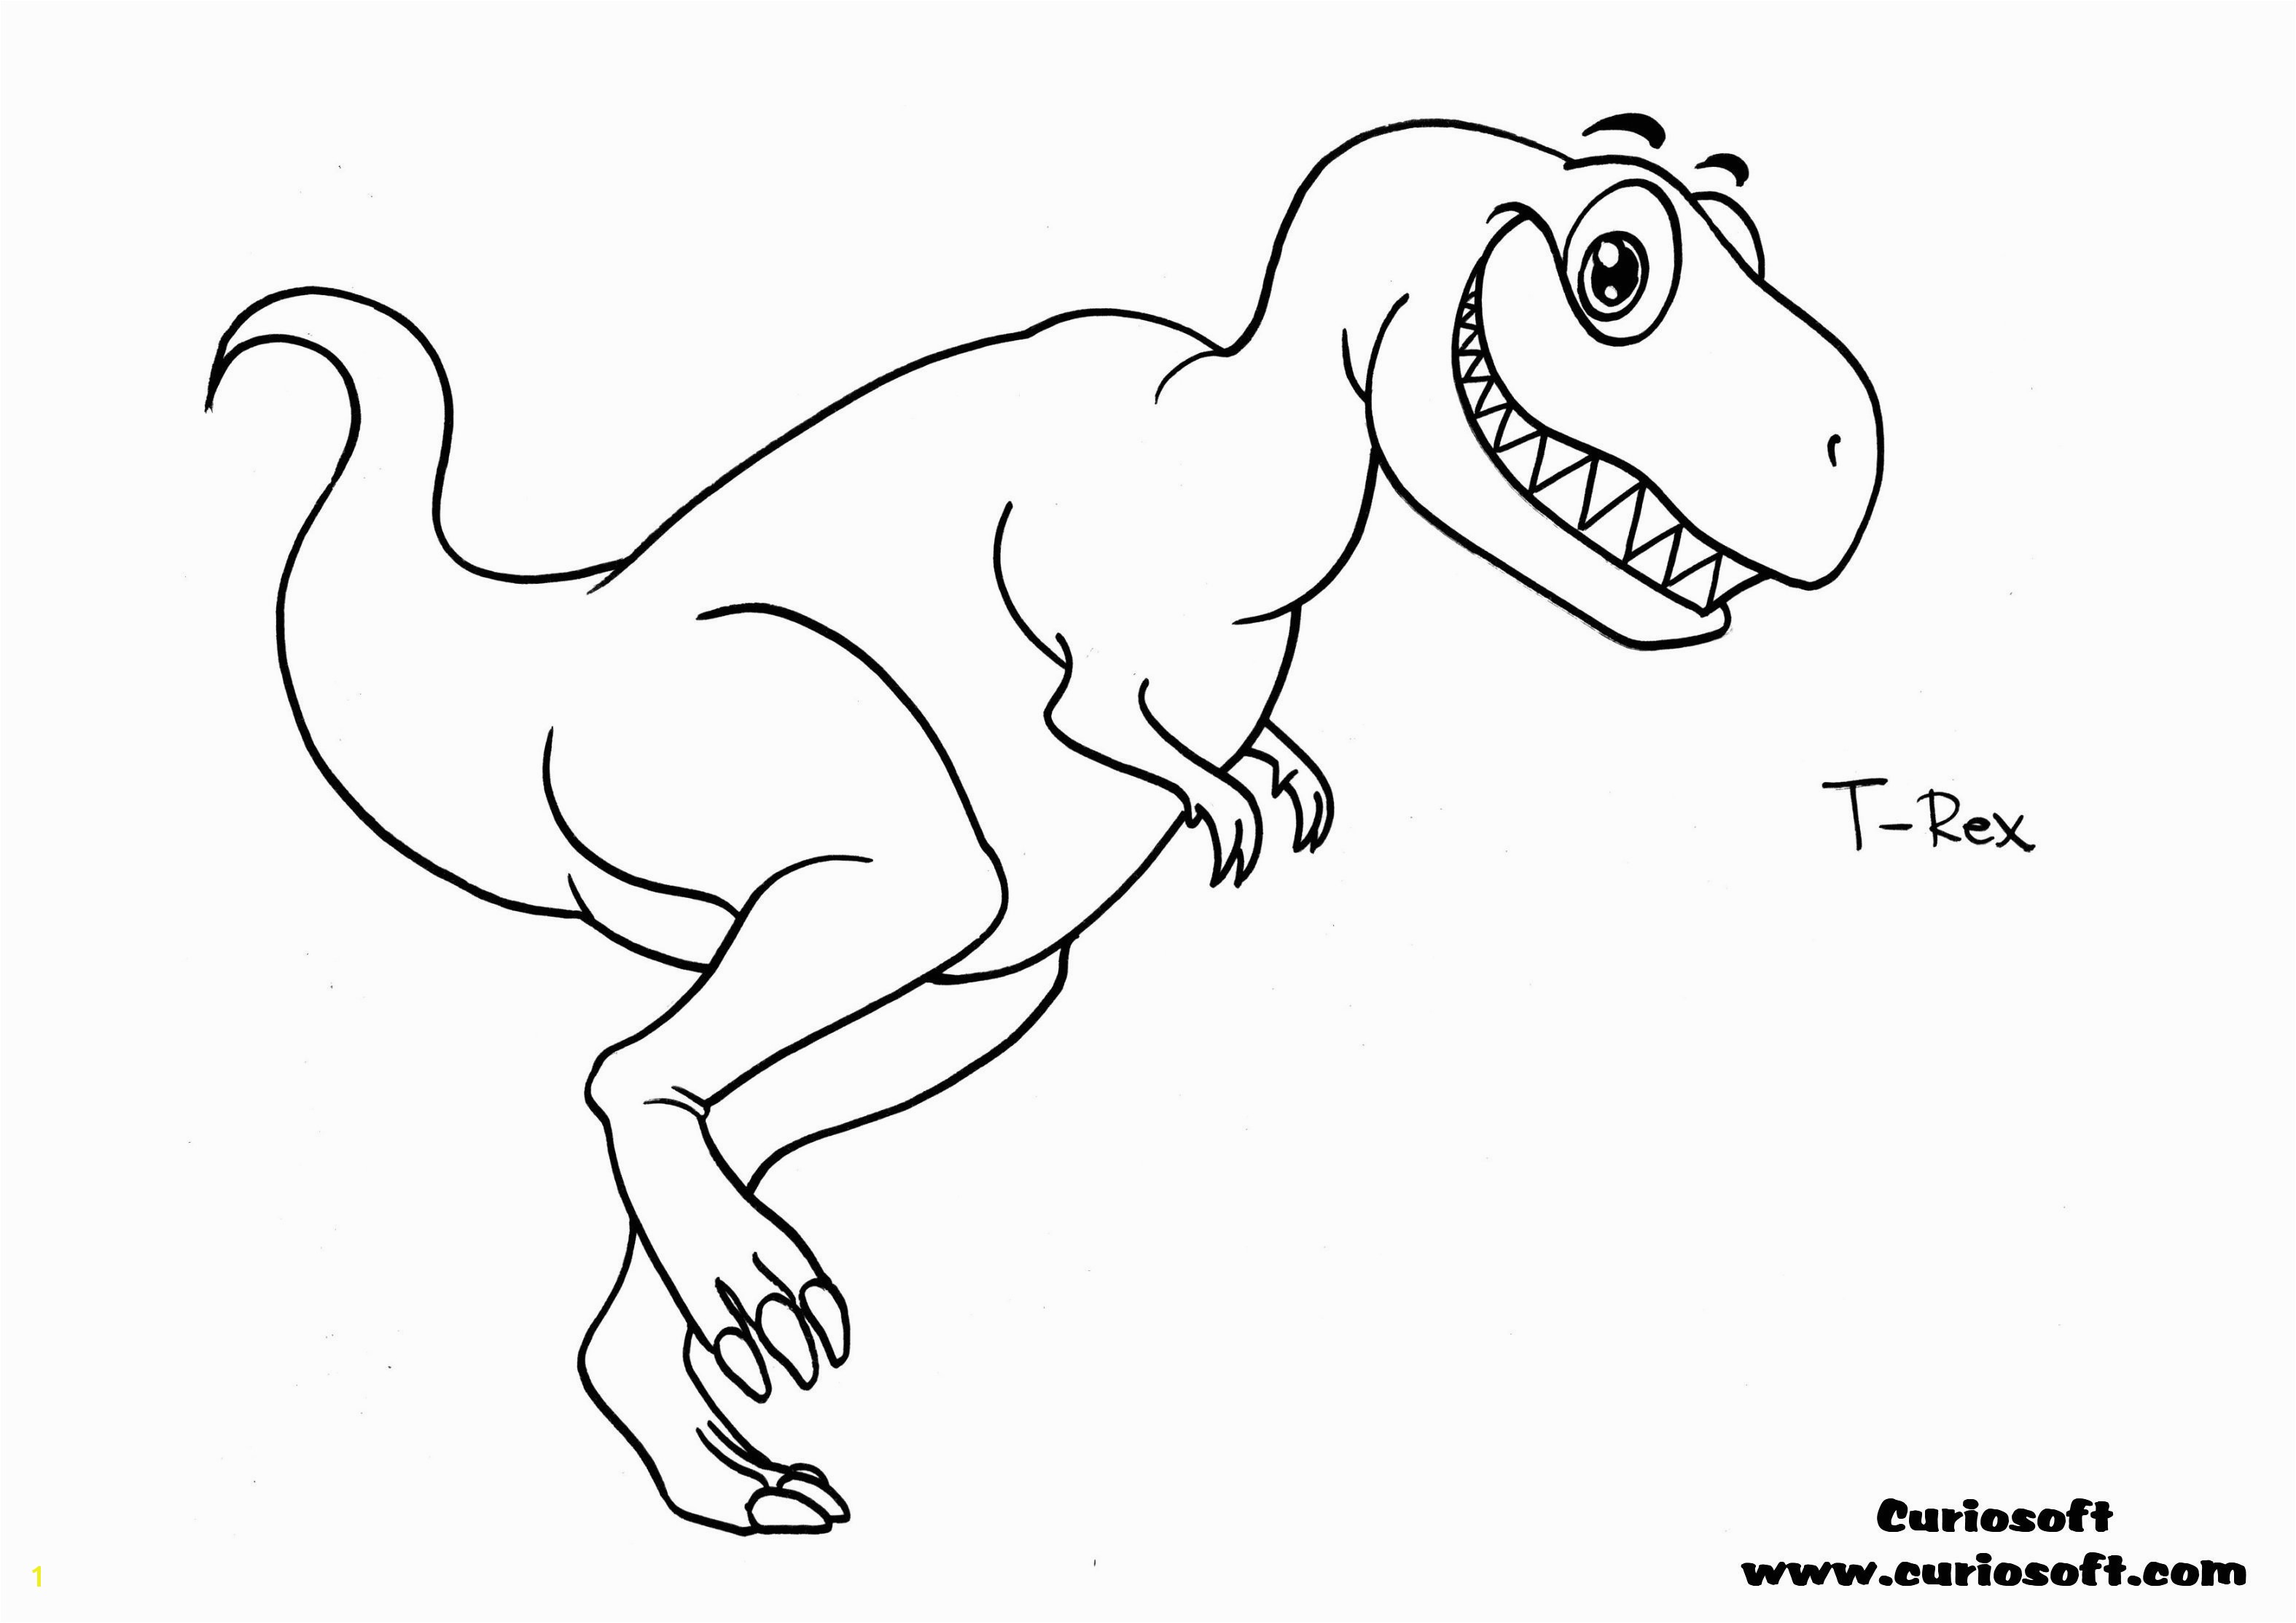 T Rex Coloring Pages Part 78 Printable Coloring Page For Kid Coloring Page Super Hero